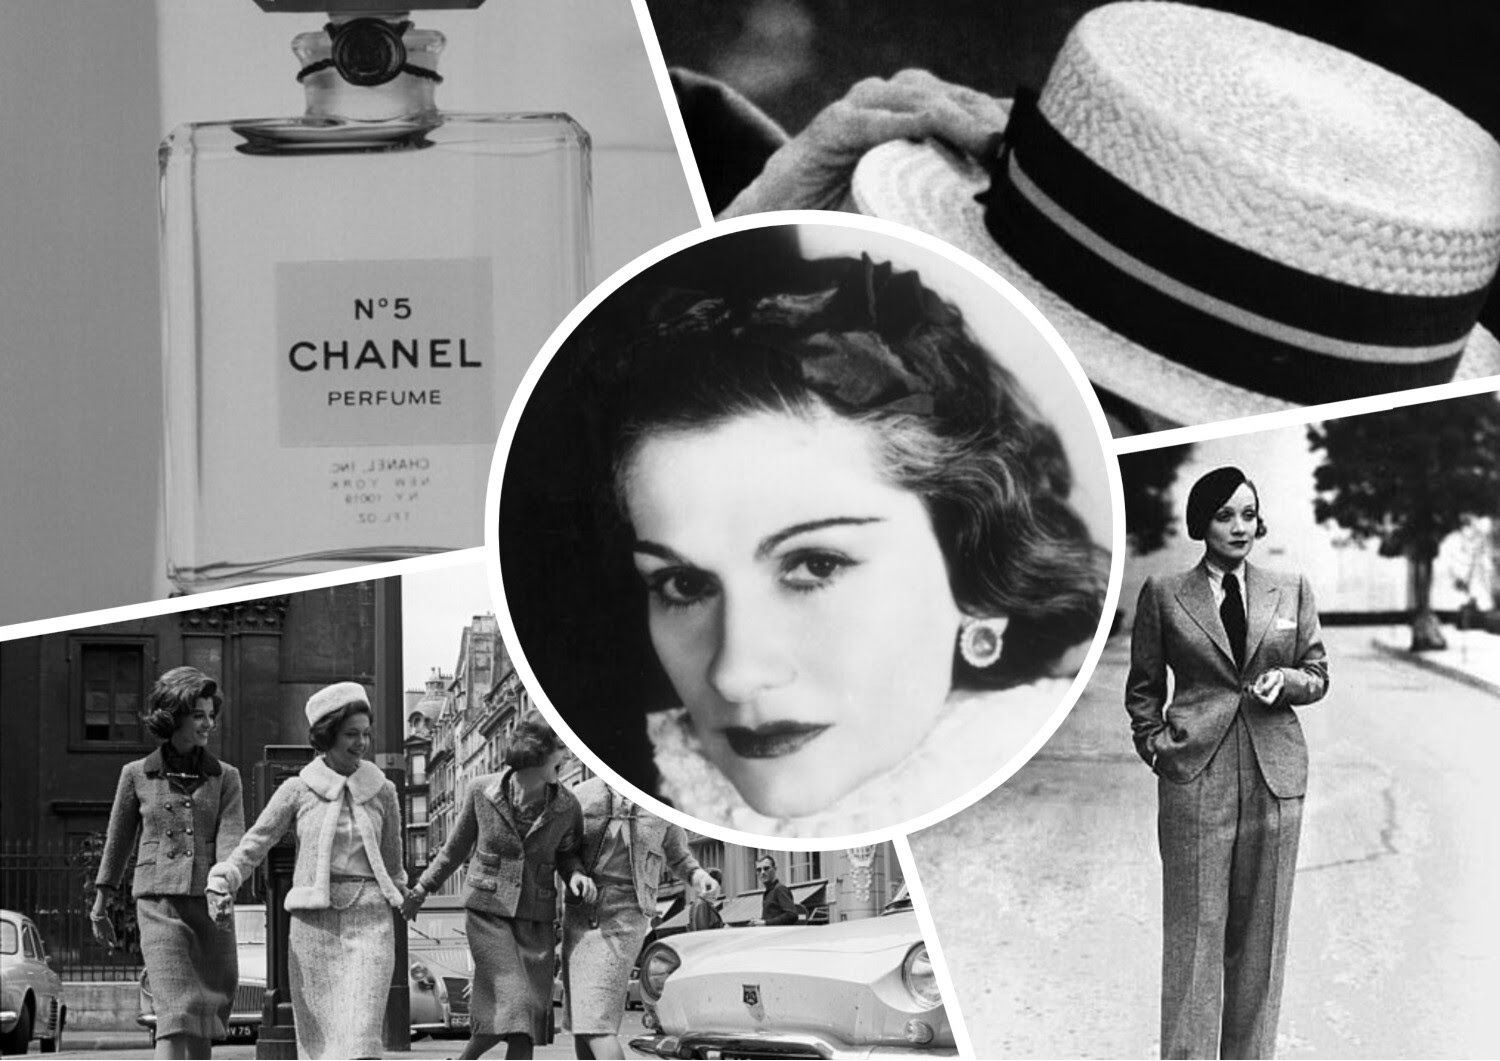 Top 5 about the life Coco Chanel - HeyUGuys